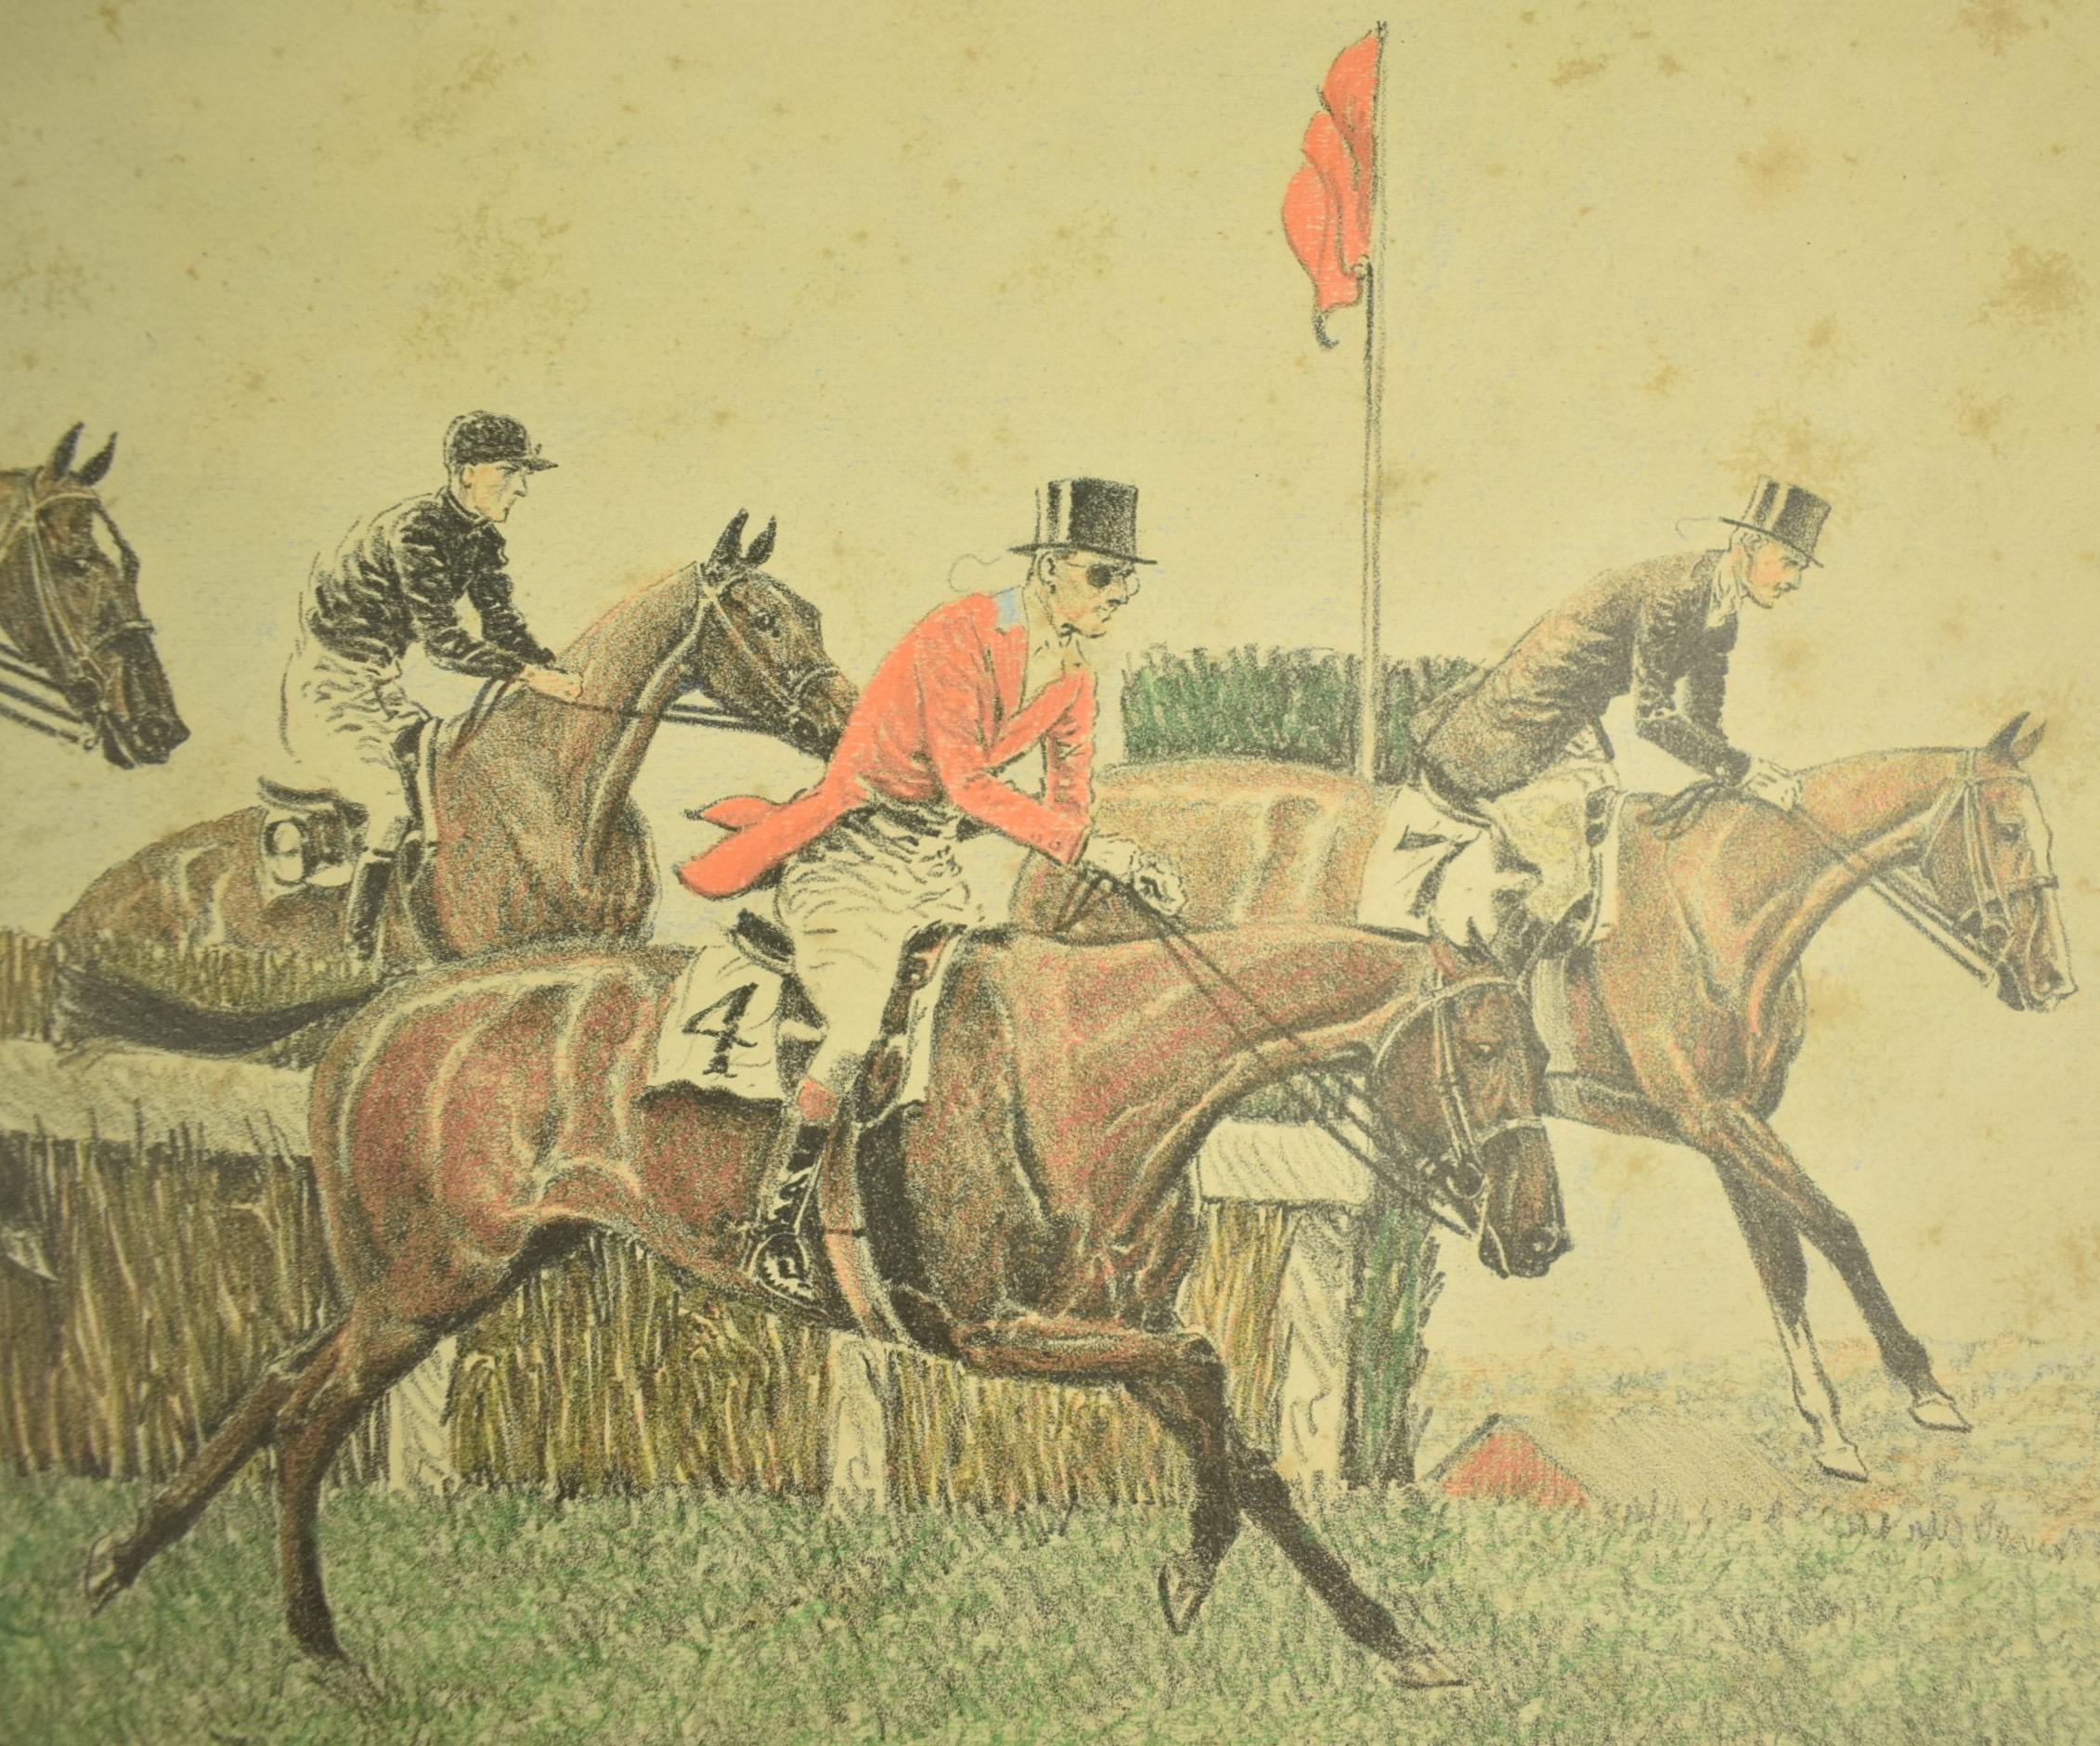 West Hills Race Meeting November 13, 1926

Drawn on stone 4/35 signed Paul Brown lower right

Art Sz: 13